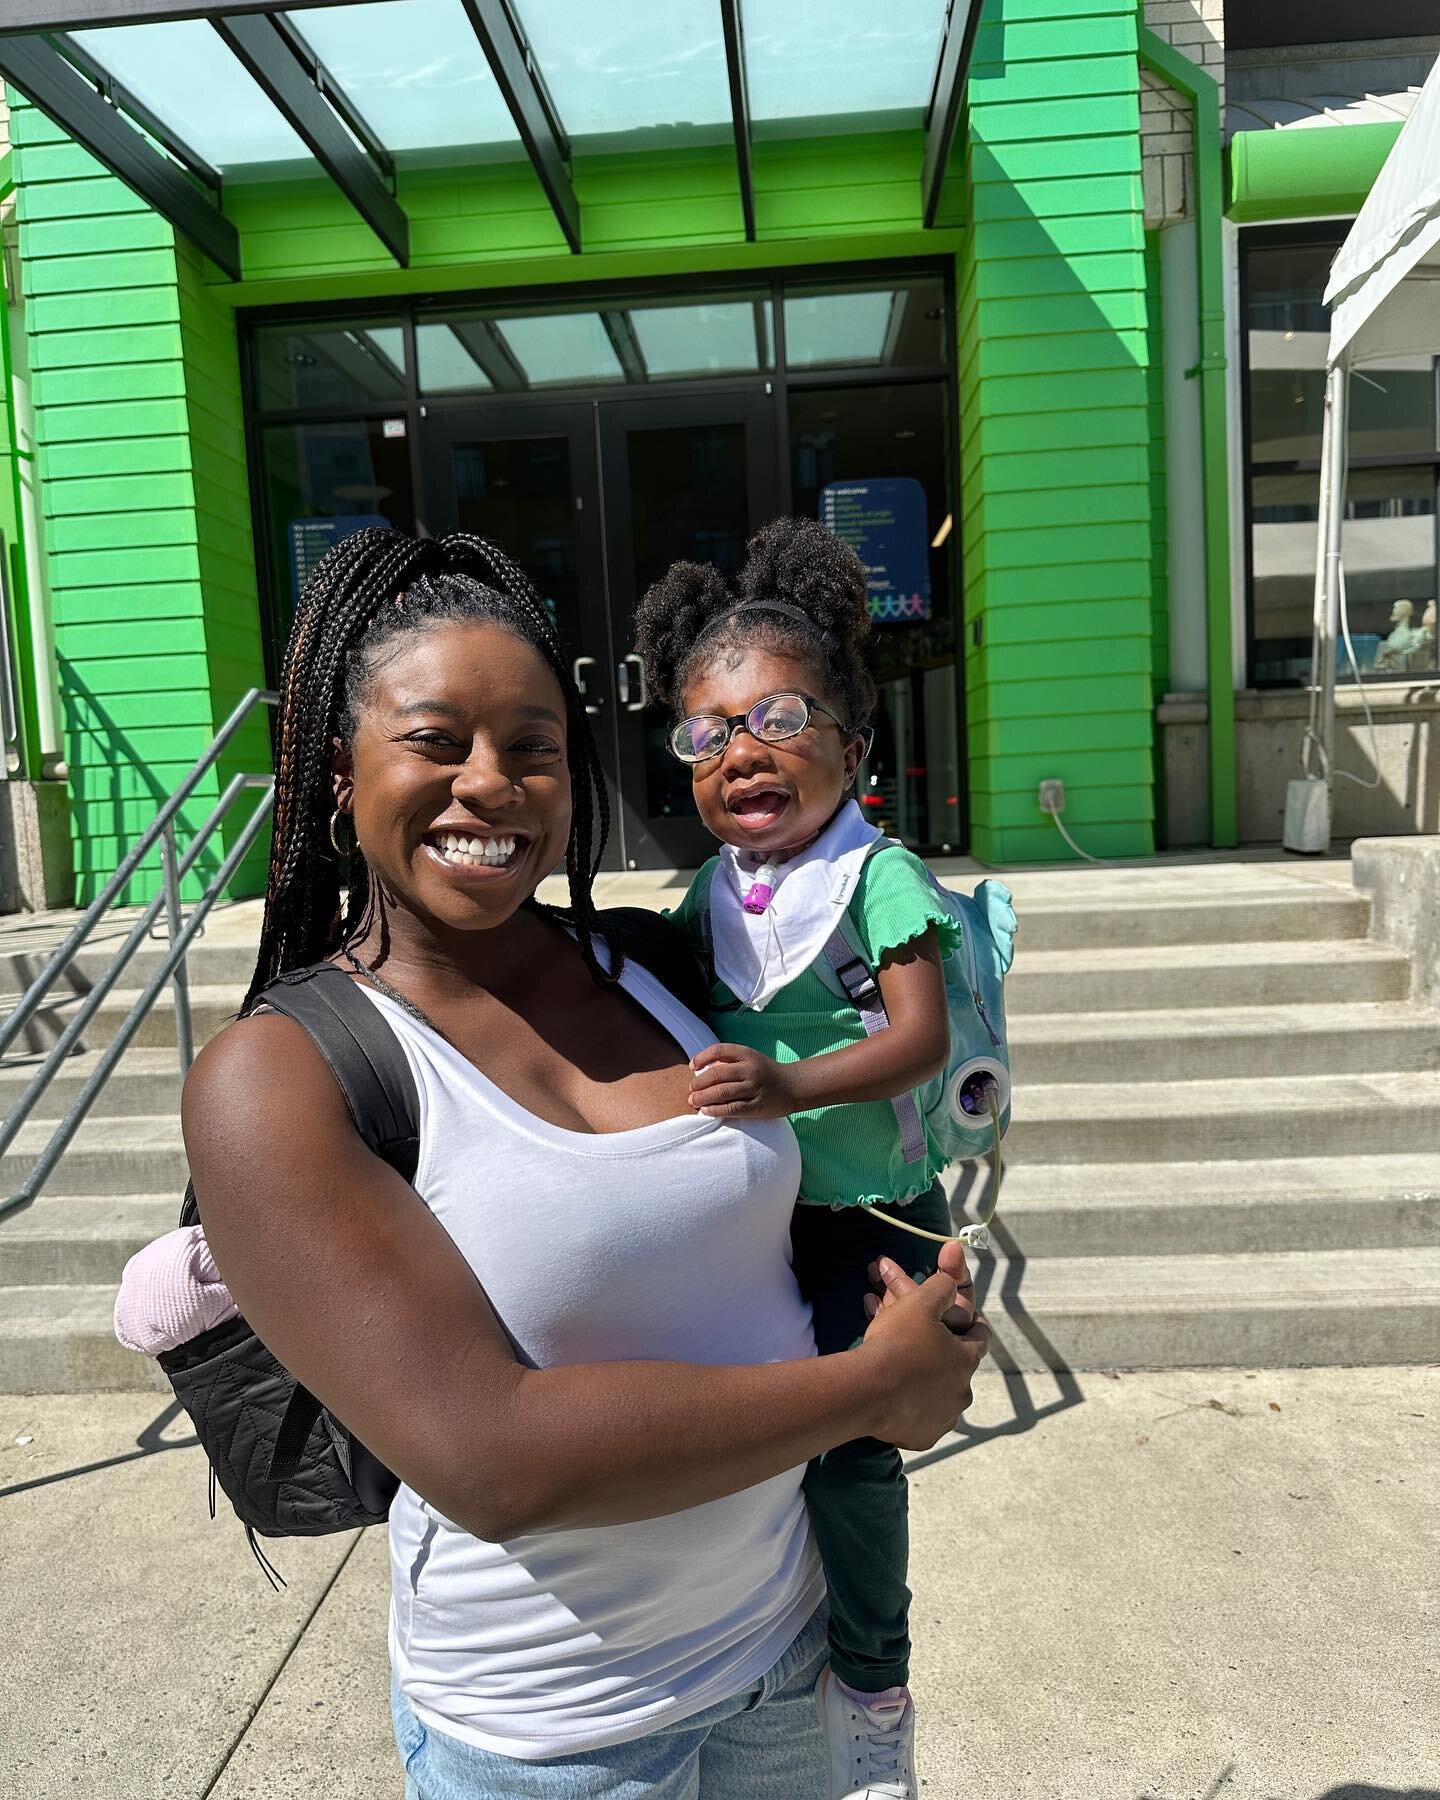 Took my big girl on a solo date + our nurse of course to her new favorite place, the Children&rsquo;s Museum. We&rsquo;ve been doing our best to give Cali extra love &amp; attention with the arrival of baby brother. It&rsquo;s been so fun seeing her 